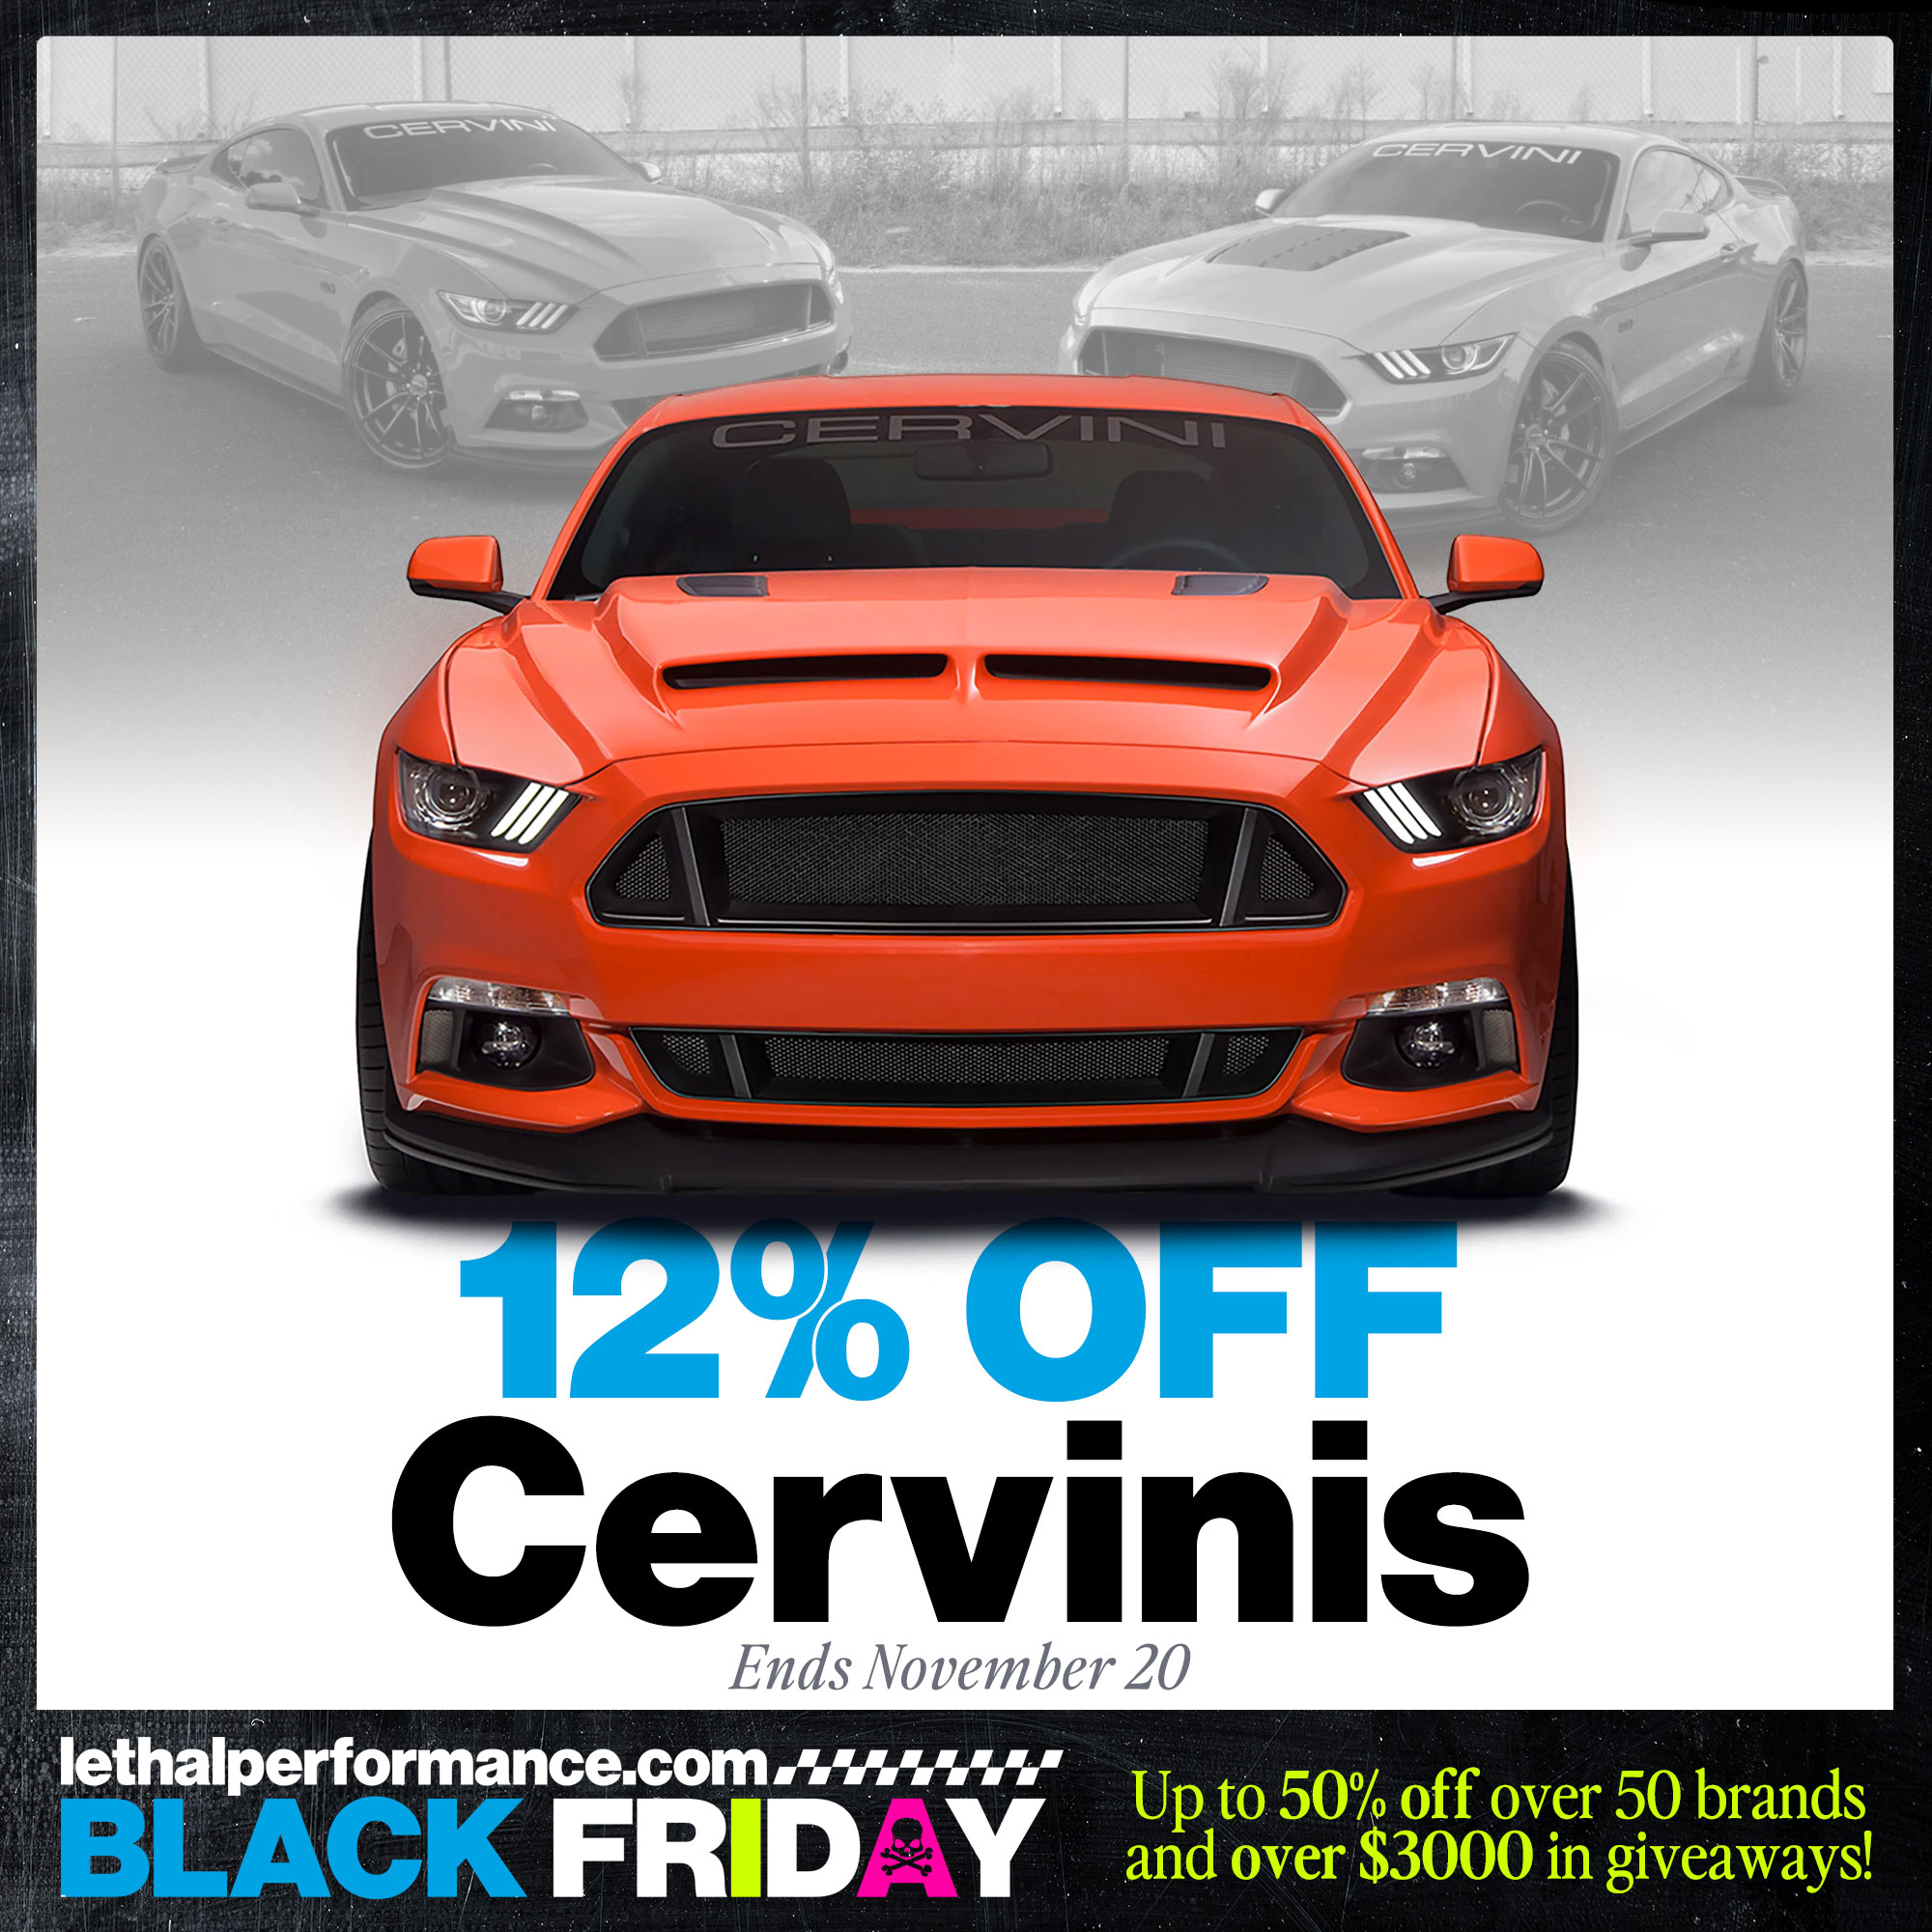 S650 Mustang Black Friday starts NOW! Up to 50% off! Cervins_Mustan